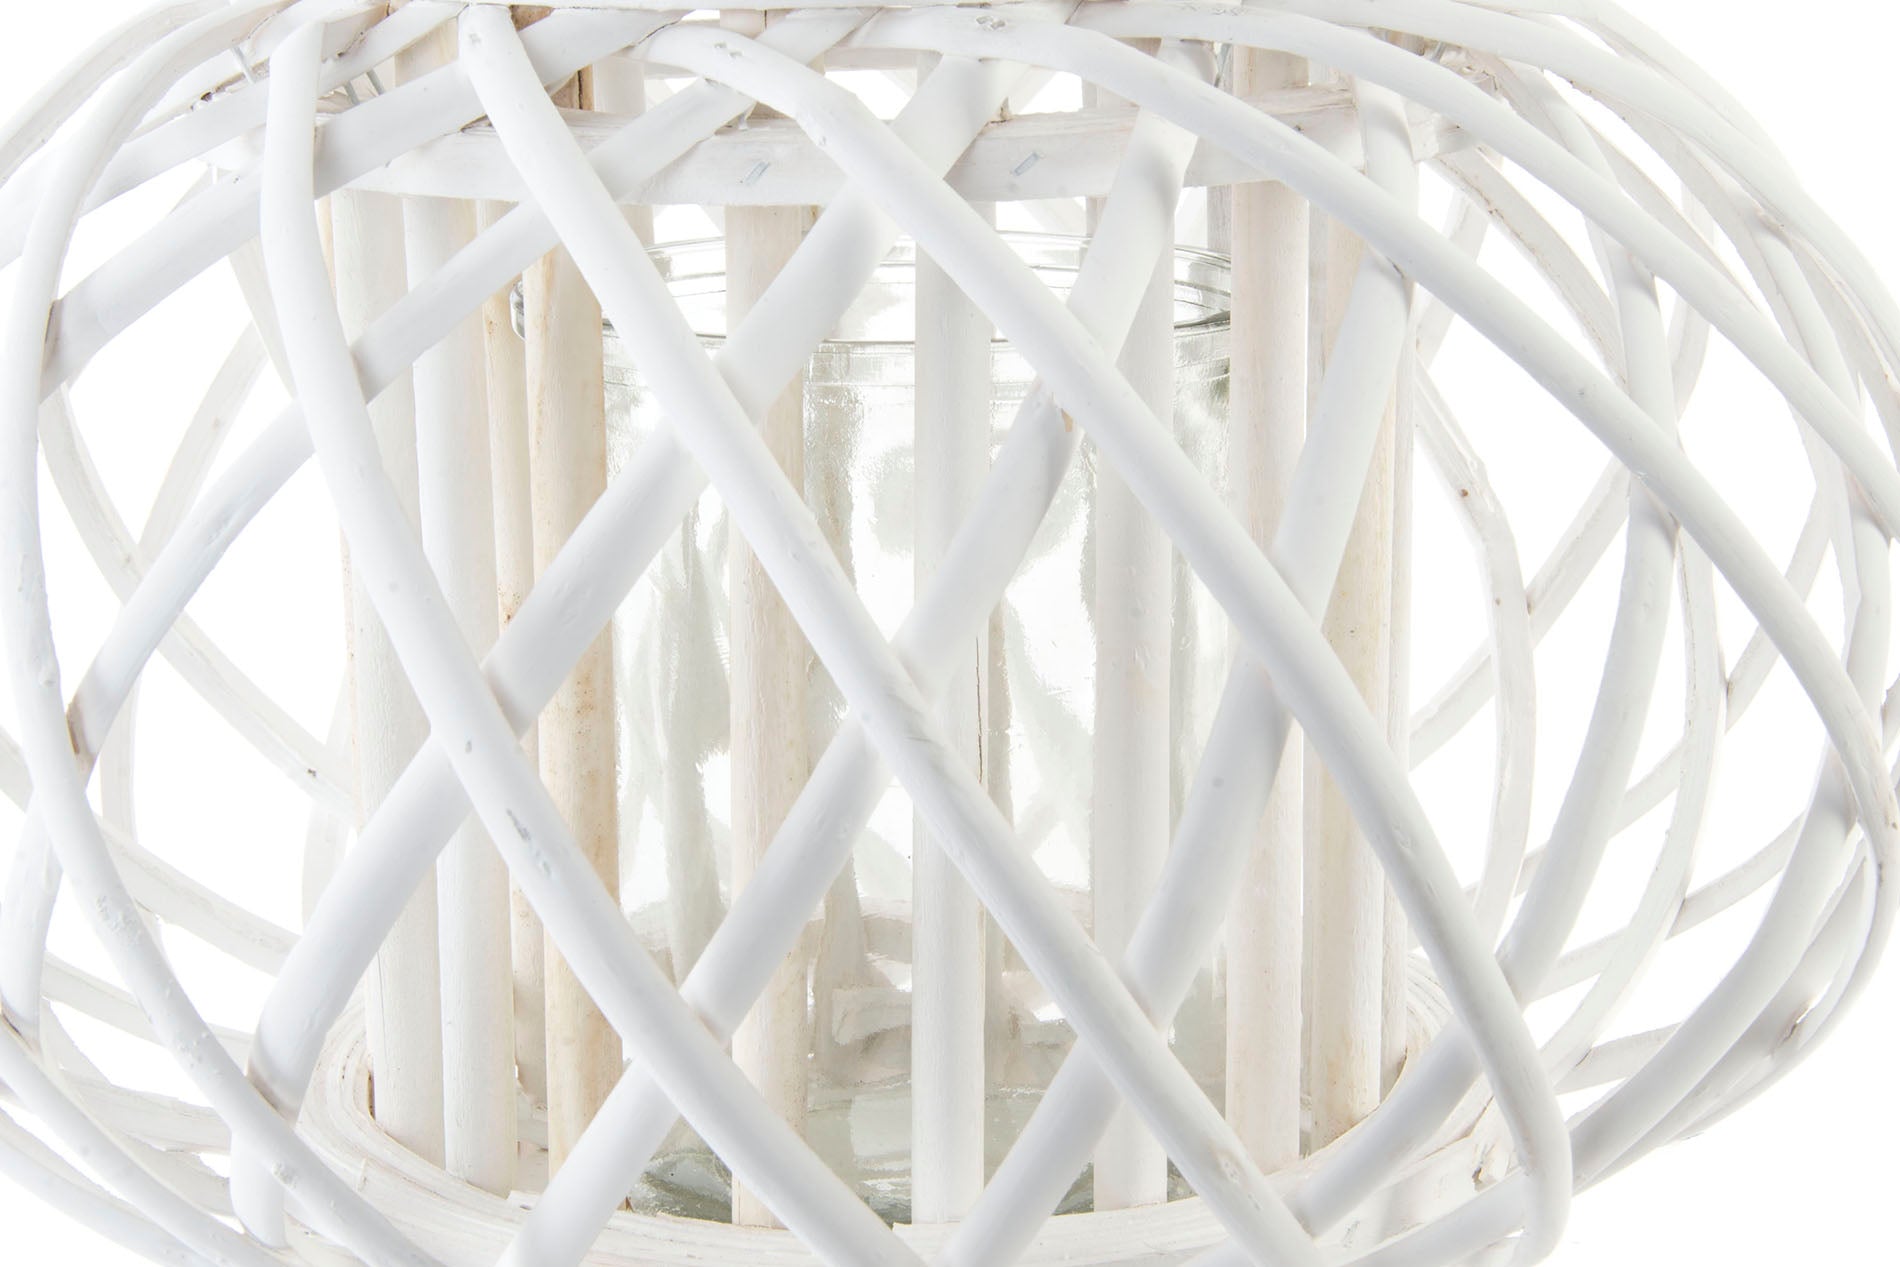 Wicker Candle Holder with glass in white